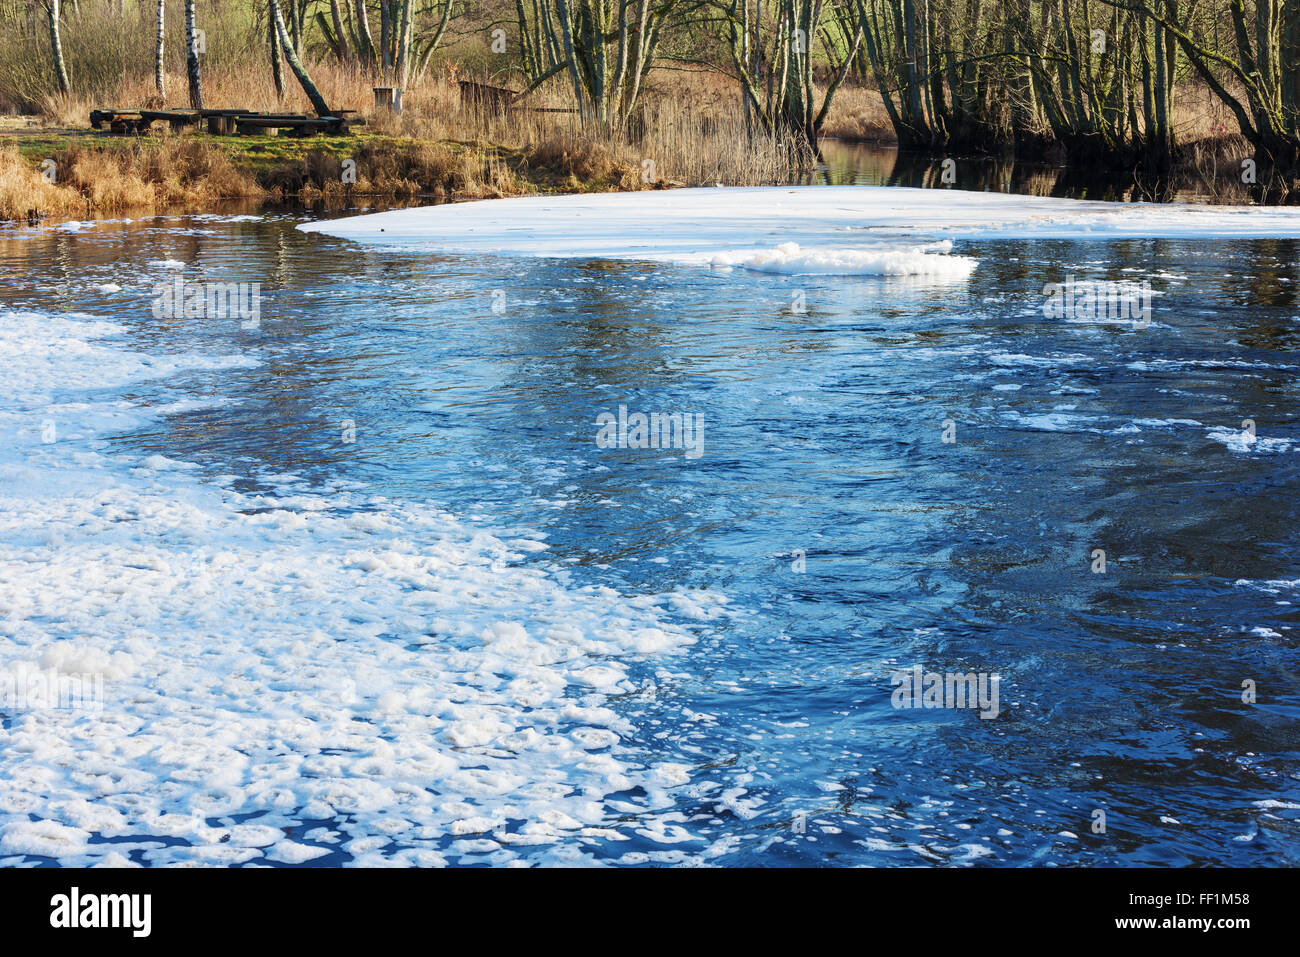 White froth has accumulated in this small bend in a river just after a waterfall. Resting place visible in the background. Stock Photo